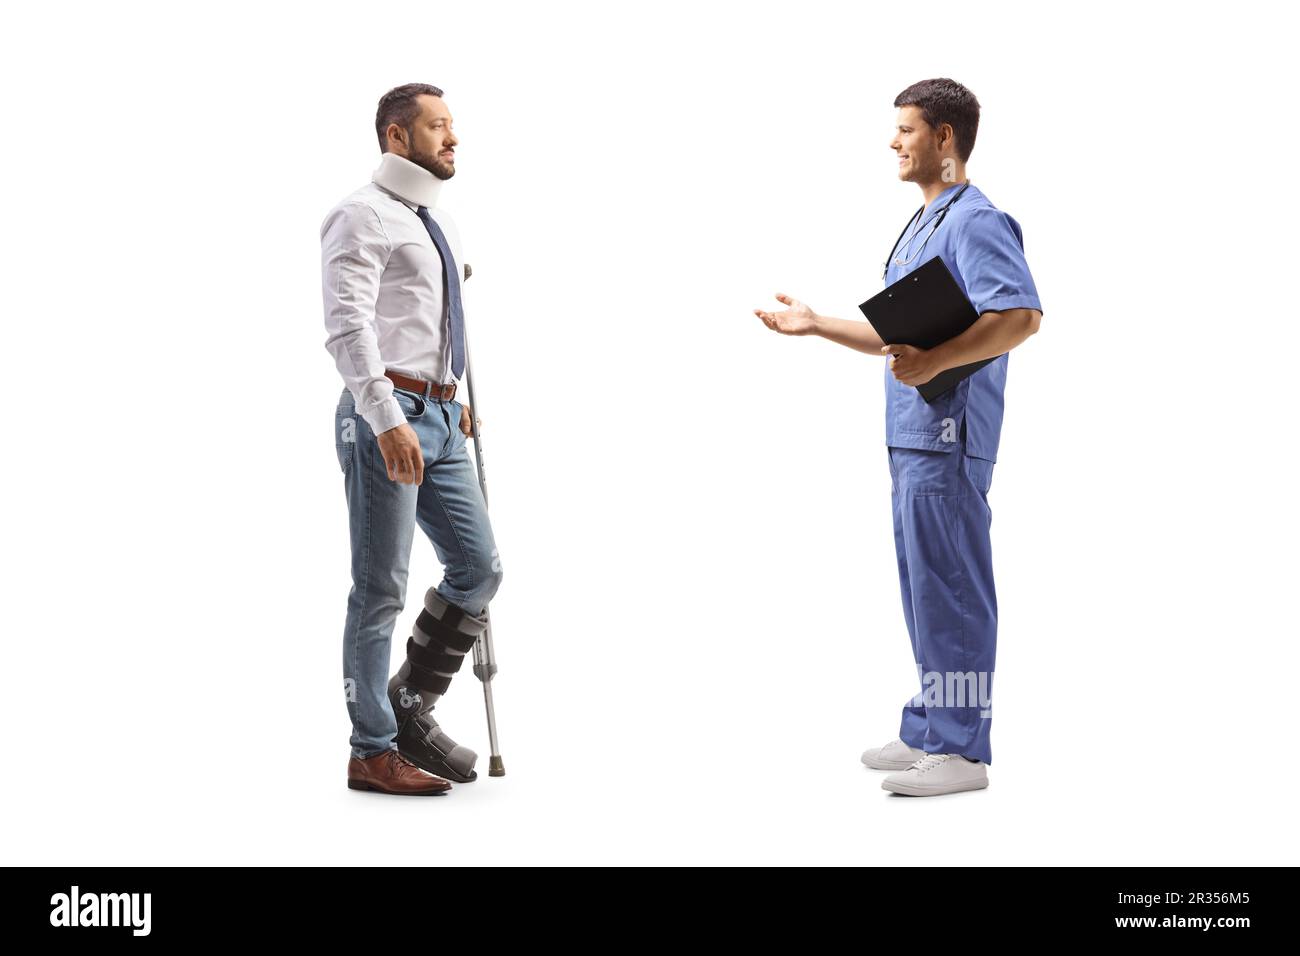 Full length profile shot of an injured man with a walking brace and cervical collar listening to a healthcare worker isolated on white background Stock Photo